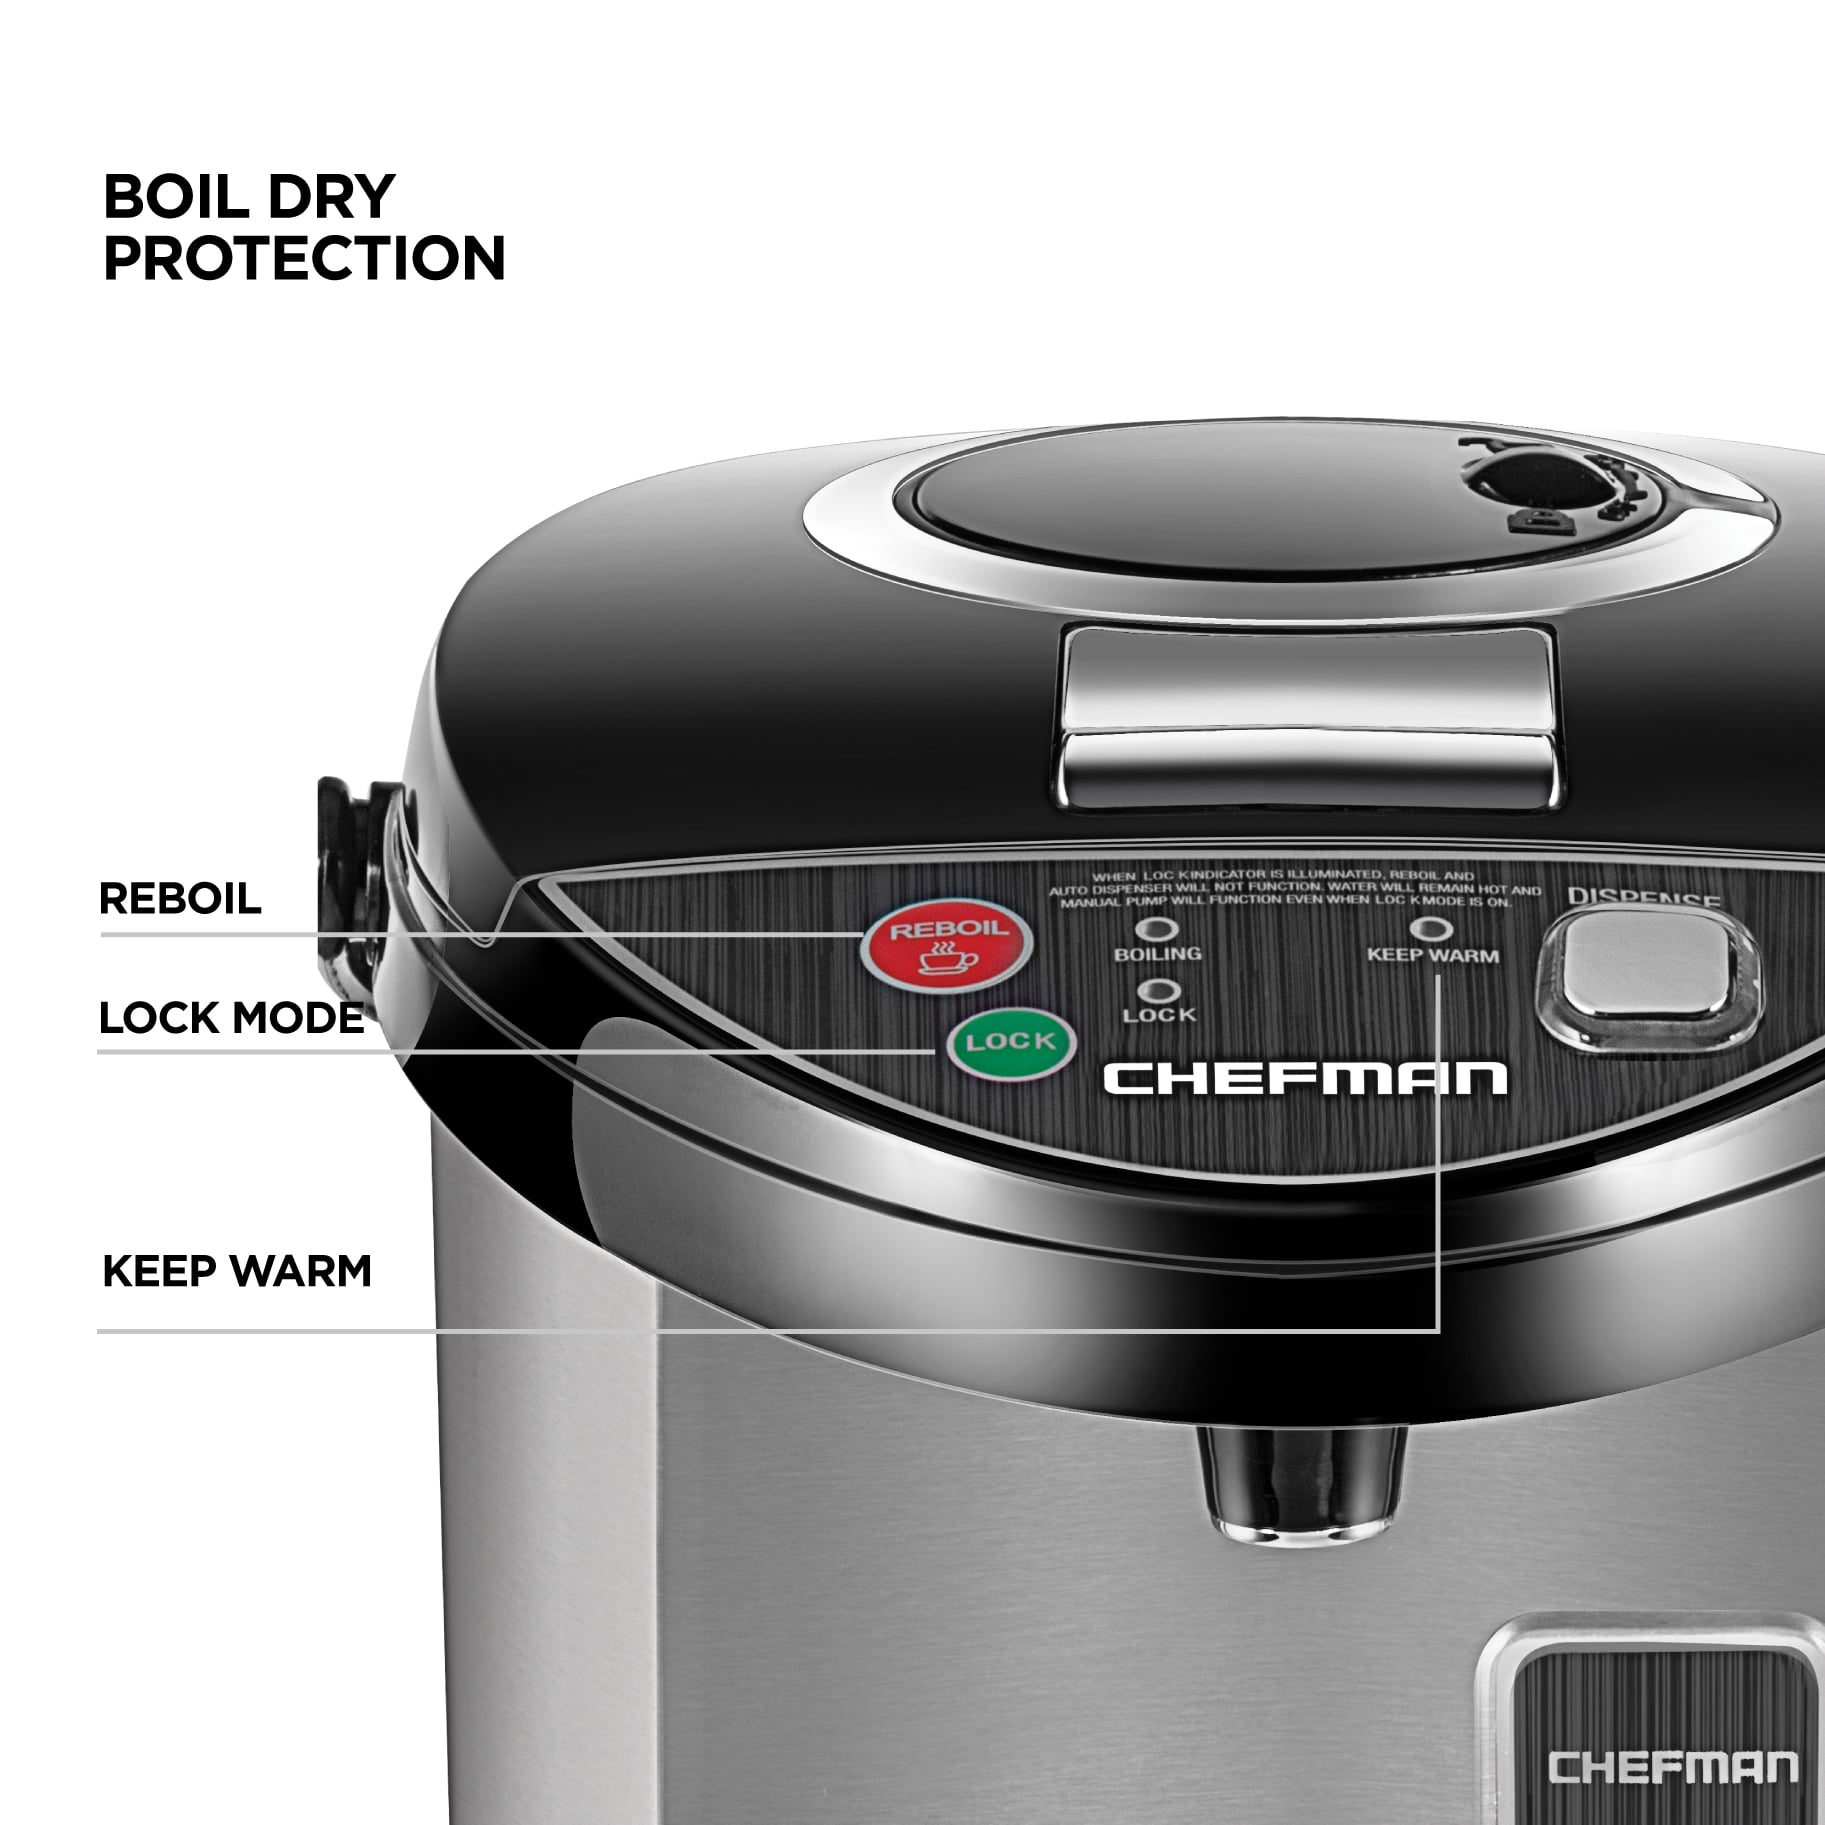 Chefman Electric Hot Water Pot Urn w/Auto & Manual Dispense Buttons, Safety Lock